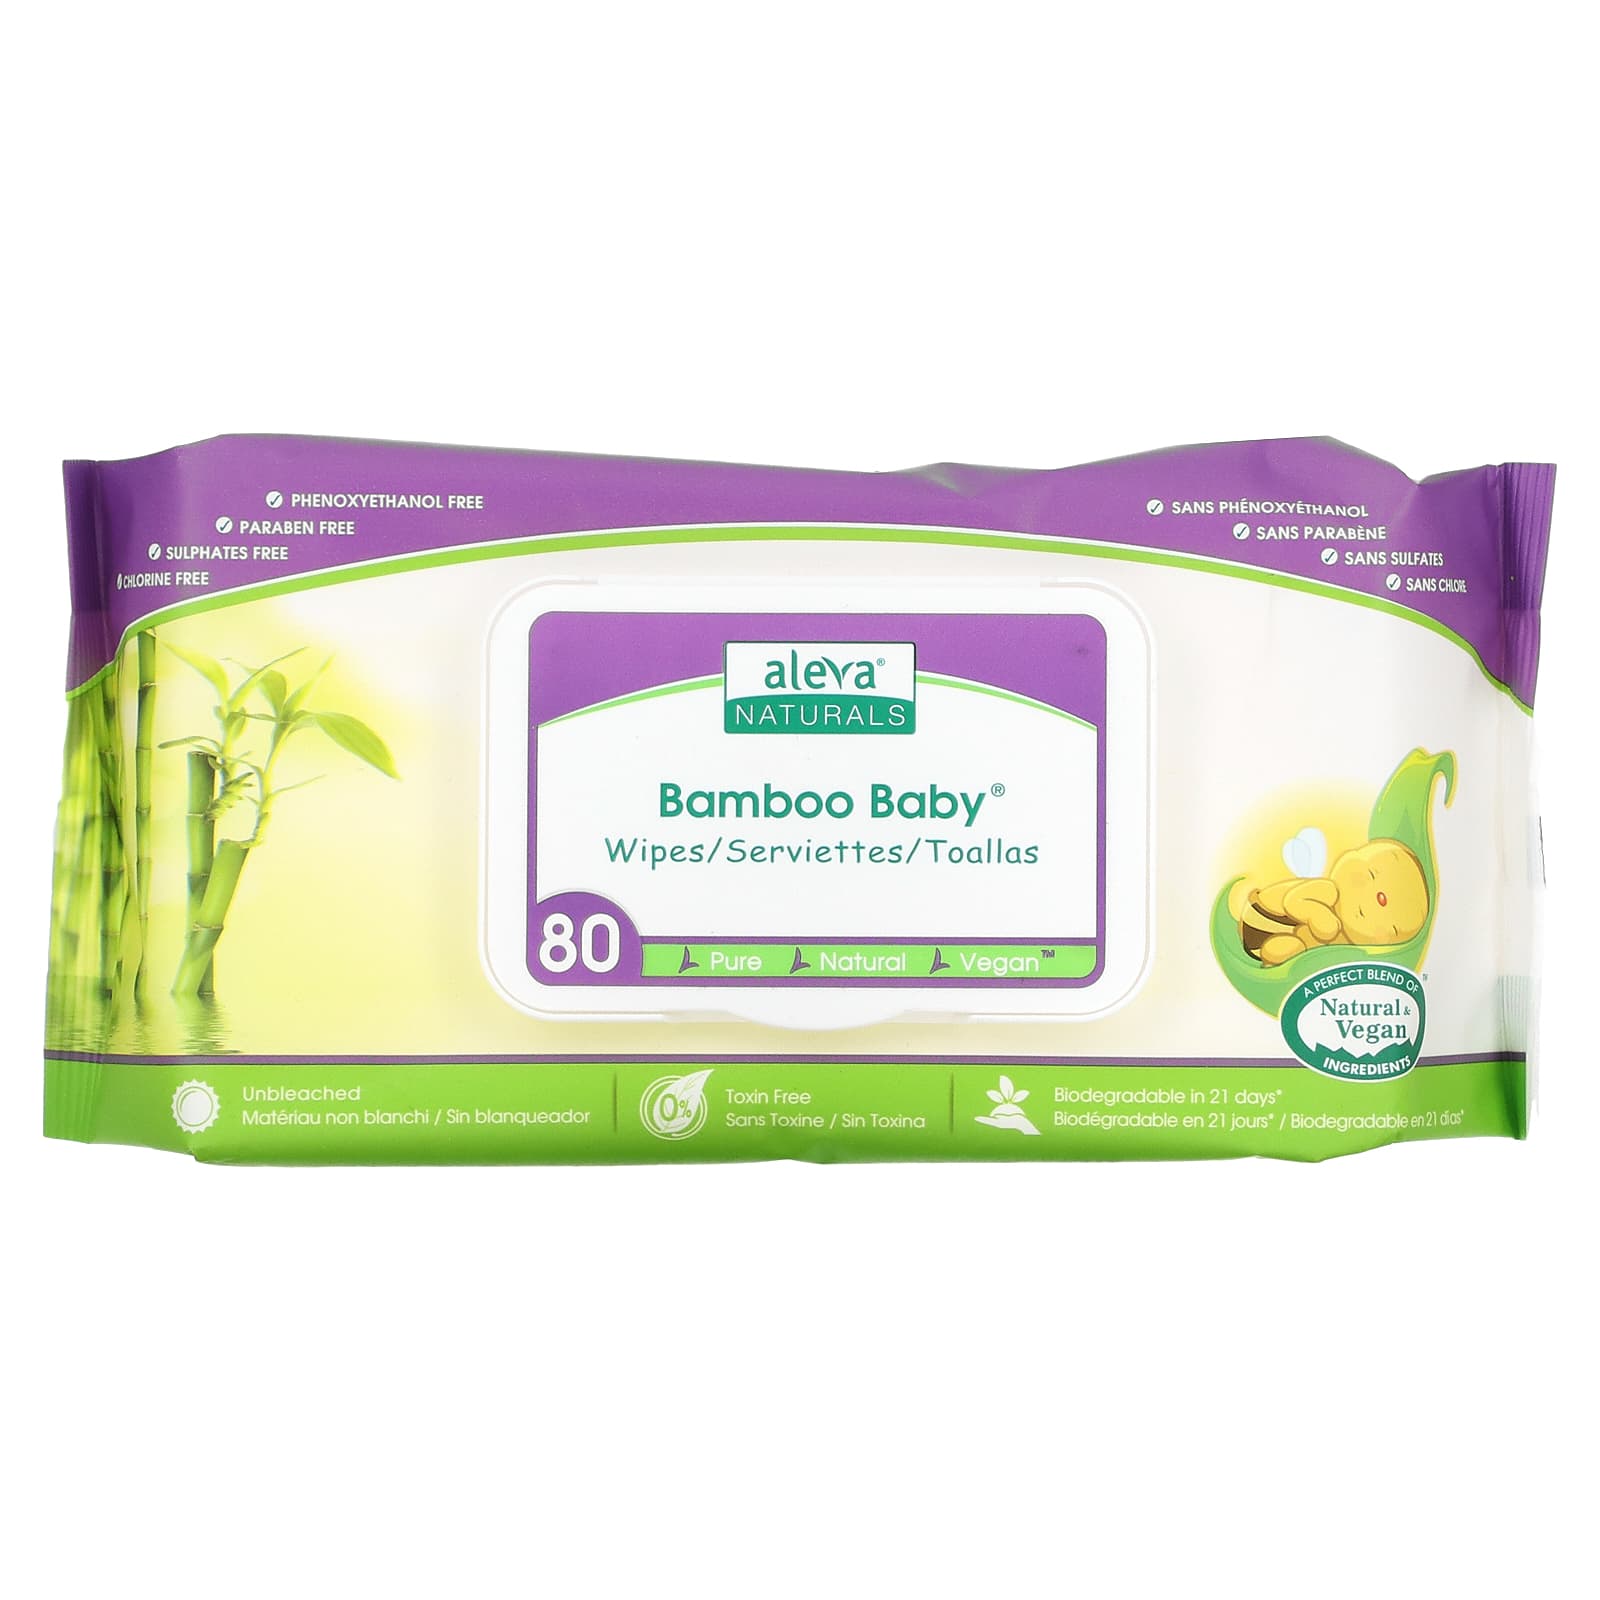 Perfect for Sensitive Skin Aleva Naturals Bamboo Baby Wipes 6 Packs of 80ct Extra Strong and Ultra Soft Natural and Organic Ingredients Certified Vegan Total of 480ct 